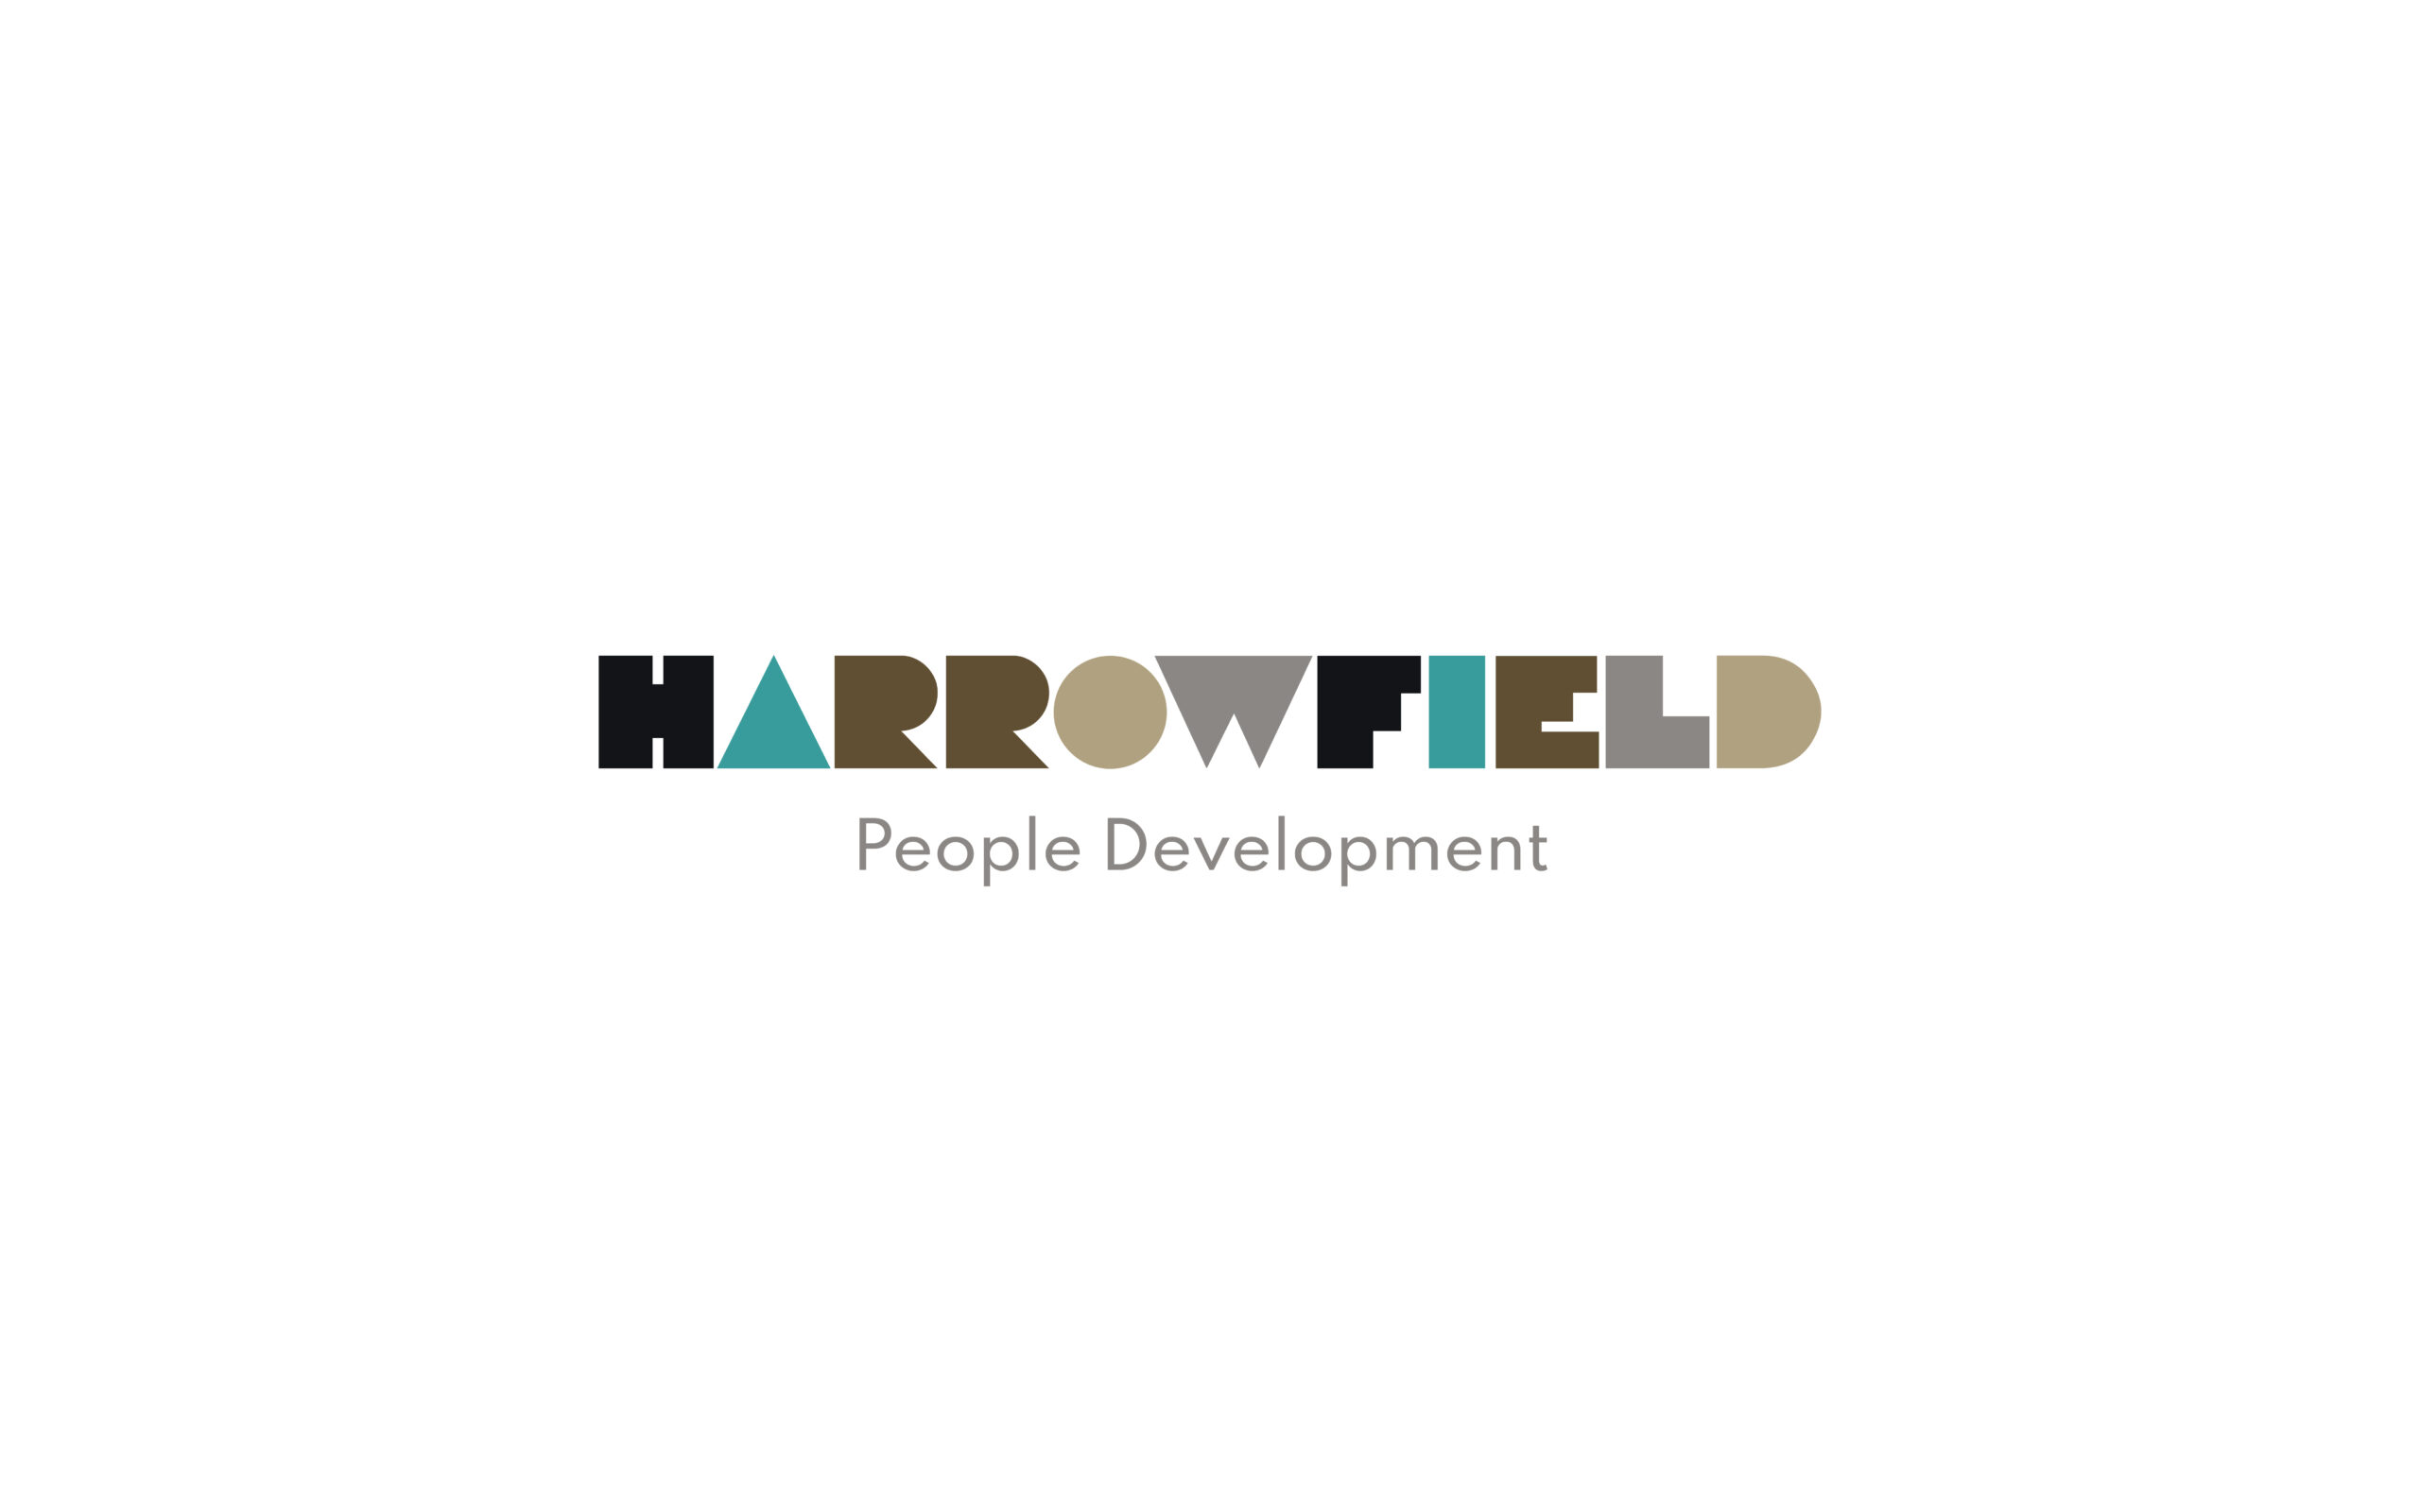 A brand that shapes people. We re-envisaged the brand for Harrowfield who wanted to really stand out and demonstrate their uniqueness.